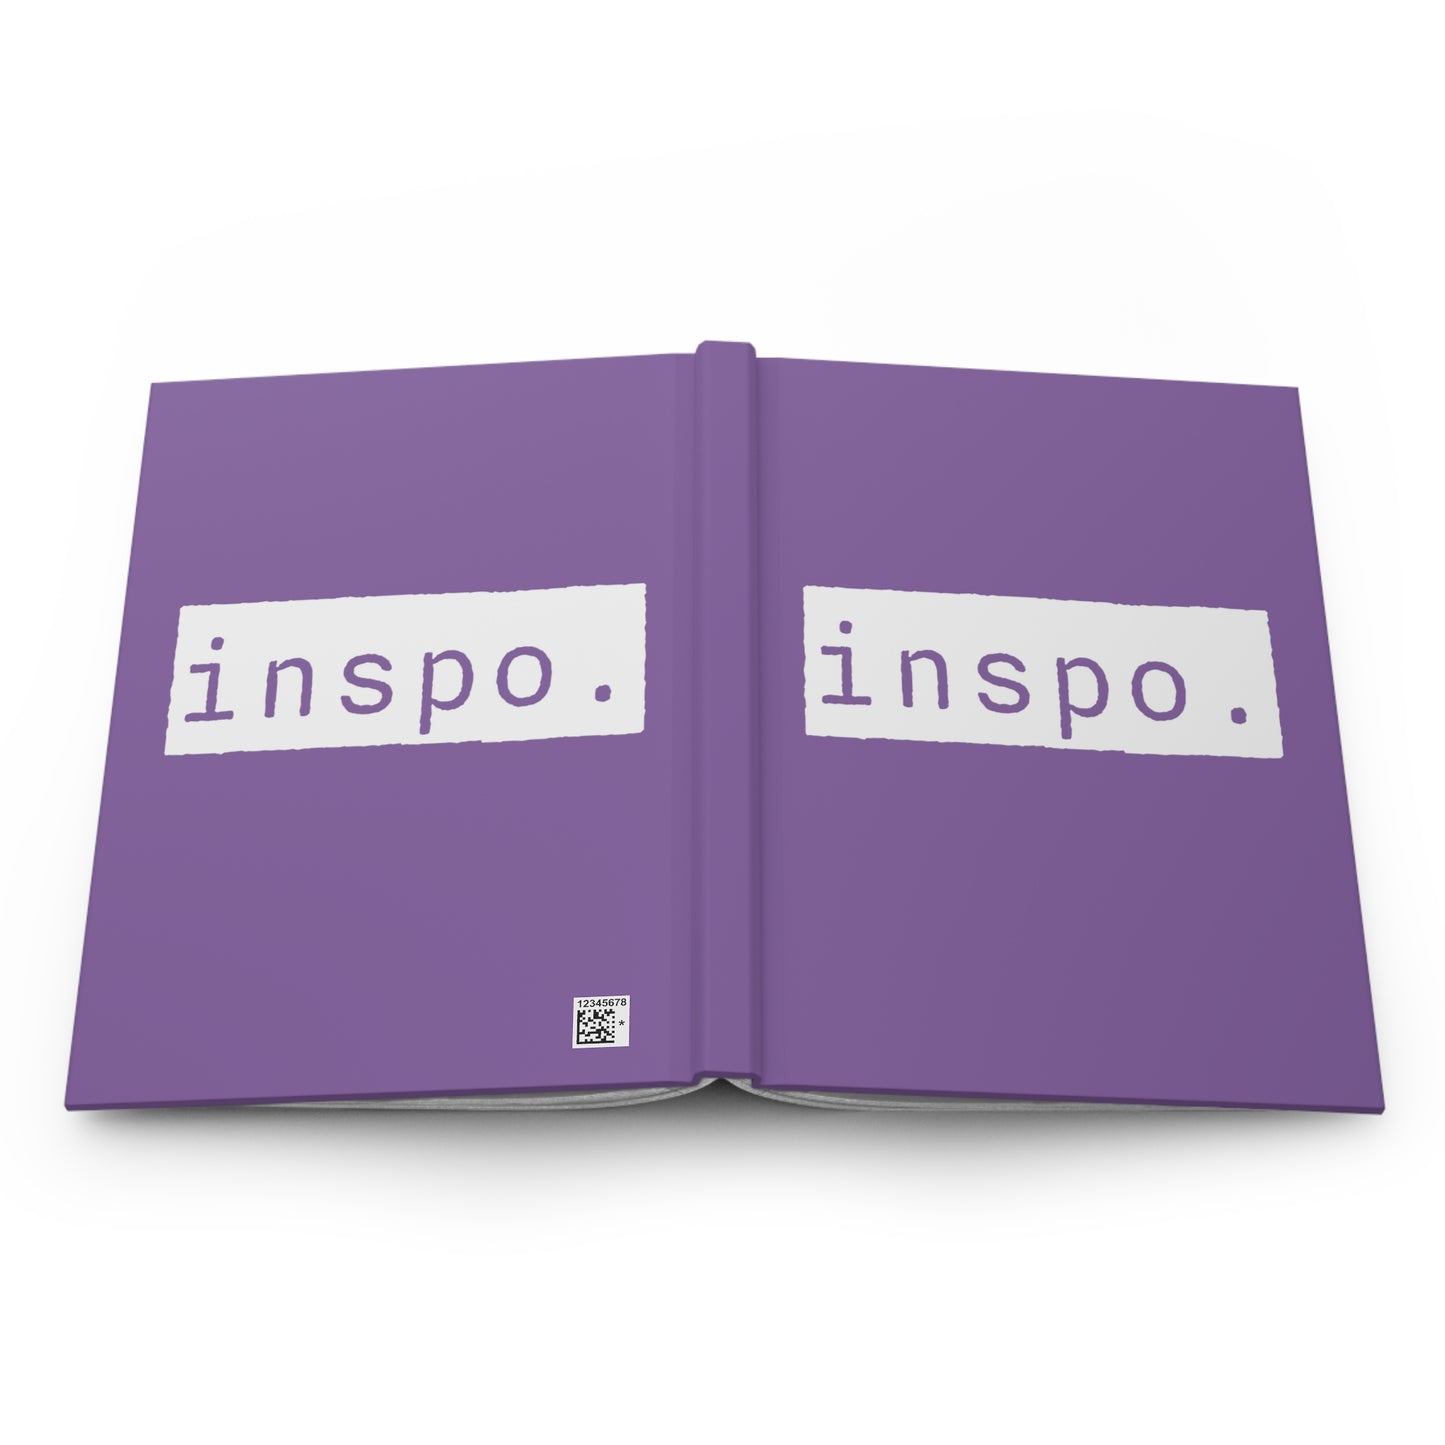 Inspo Inspiration Purple Matte Hardcover Journal | Blank Book for Notes | Lined Notebook Diary Idea Log